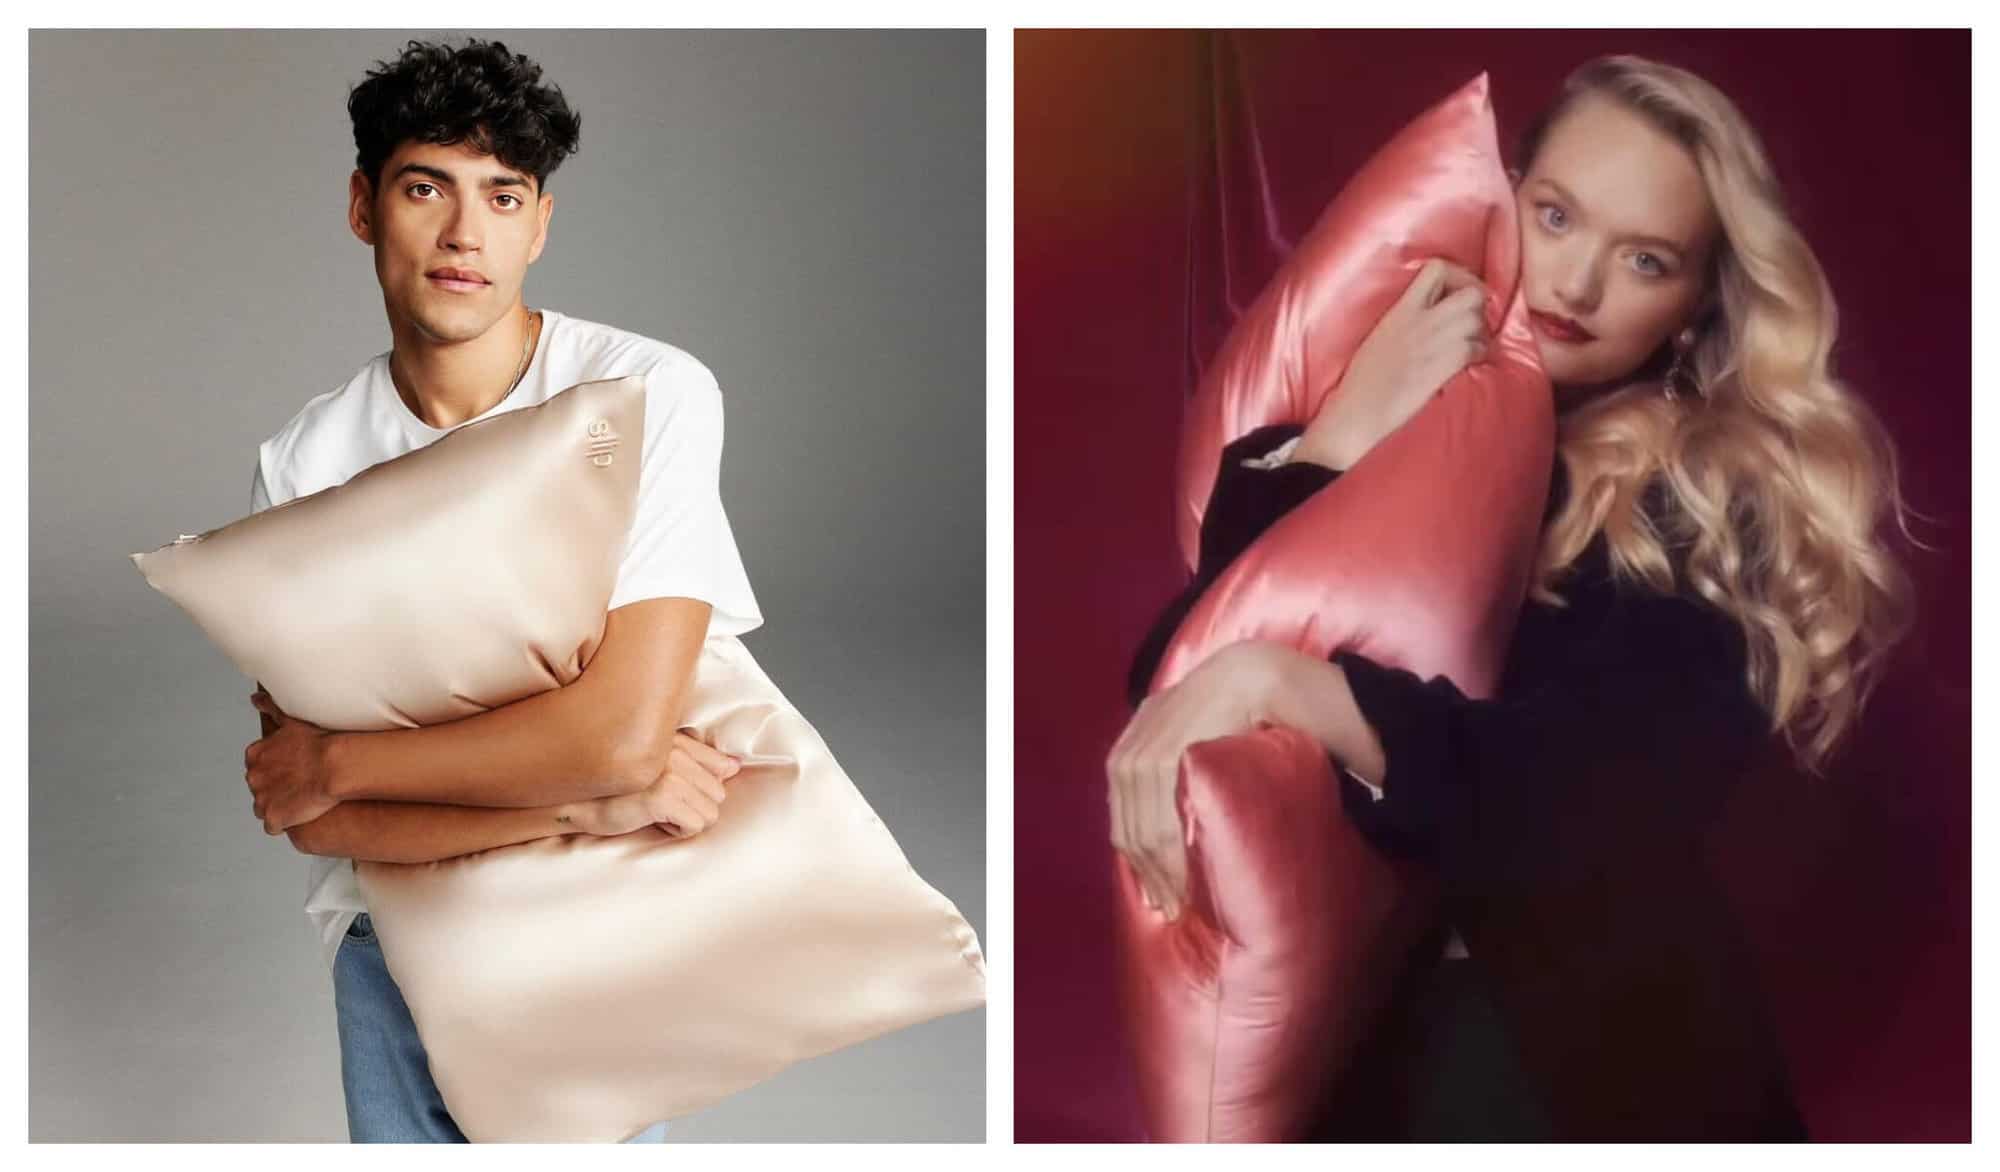 Left: A man in a white t-shirt and blue jeans hugs his cream colored Slip silk pillow. Right: A blonde woman hugs her hot pink Slip silk pillowcase against her face.